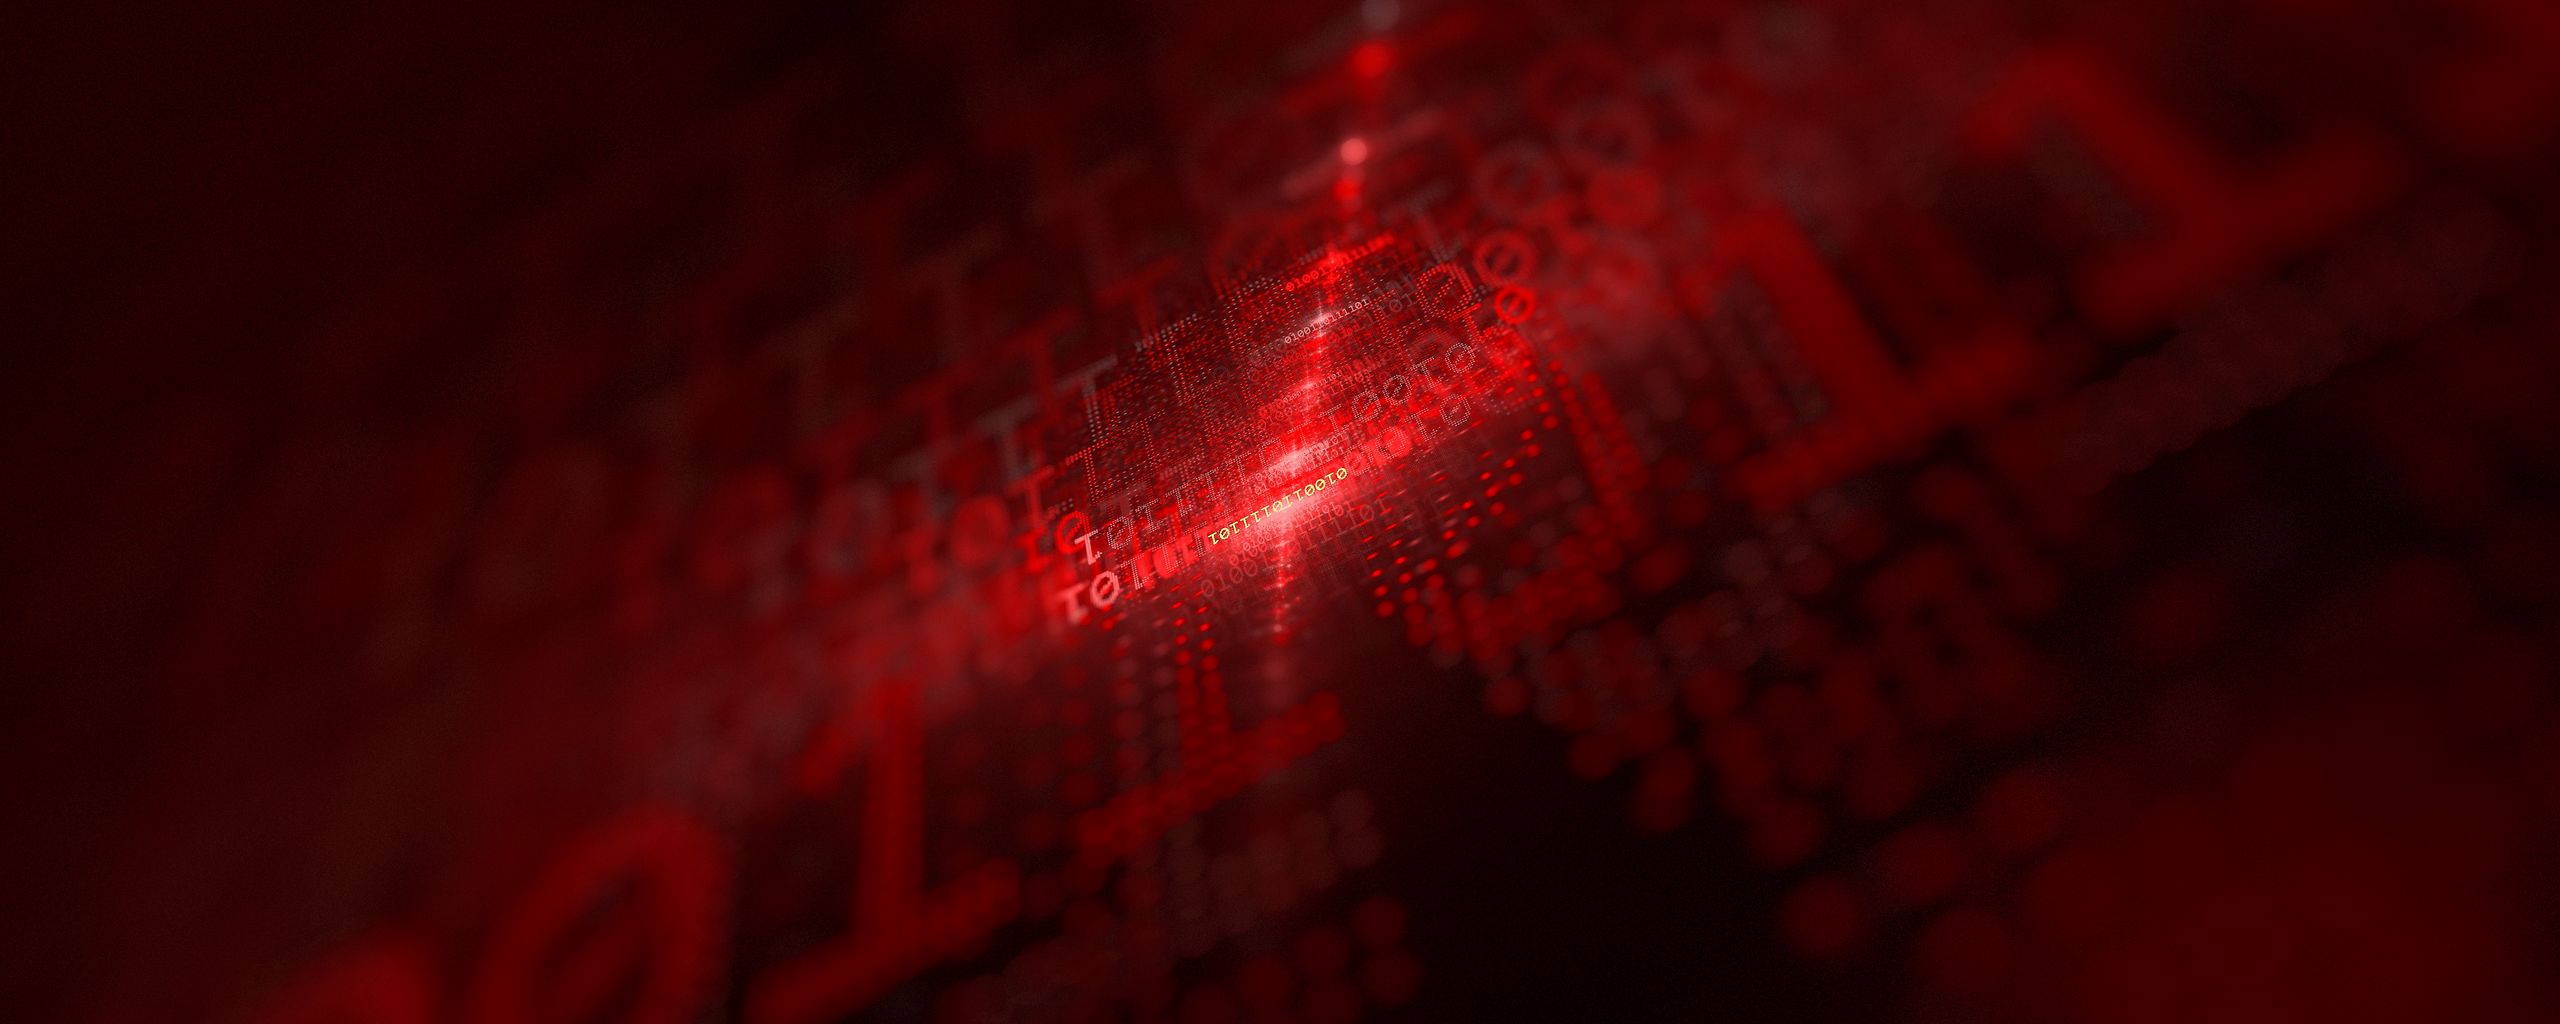 Download wallpaper 2560x1024 code, glow, red, numbers, matrix ultrawide monitor HD background